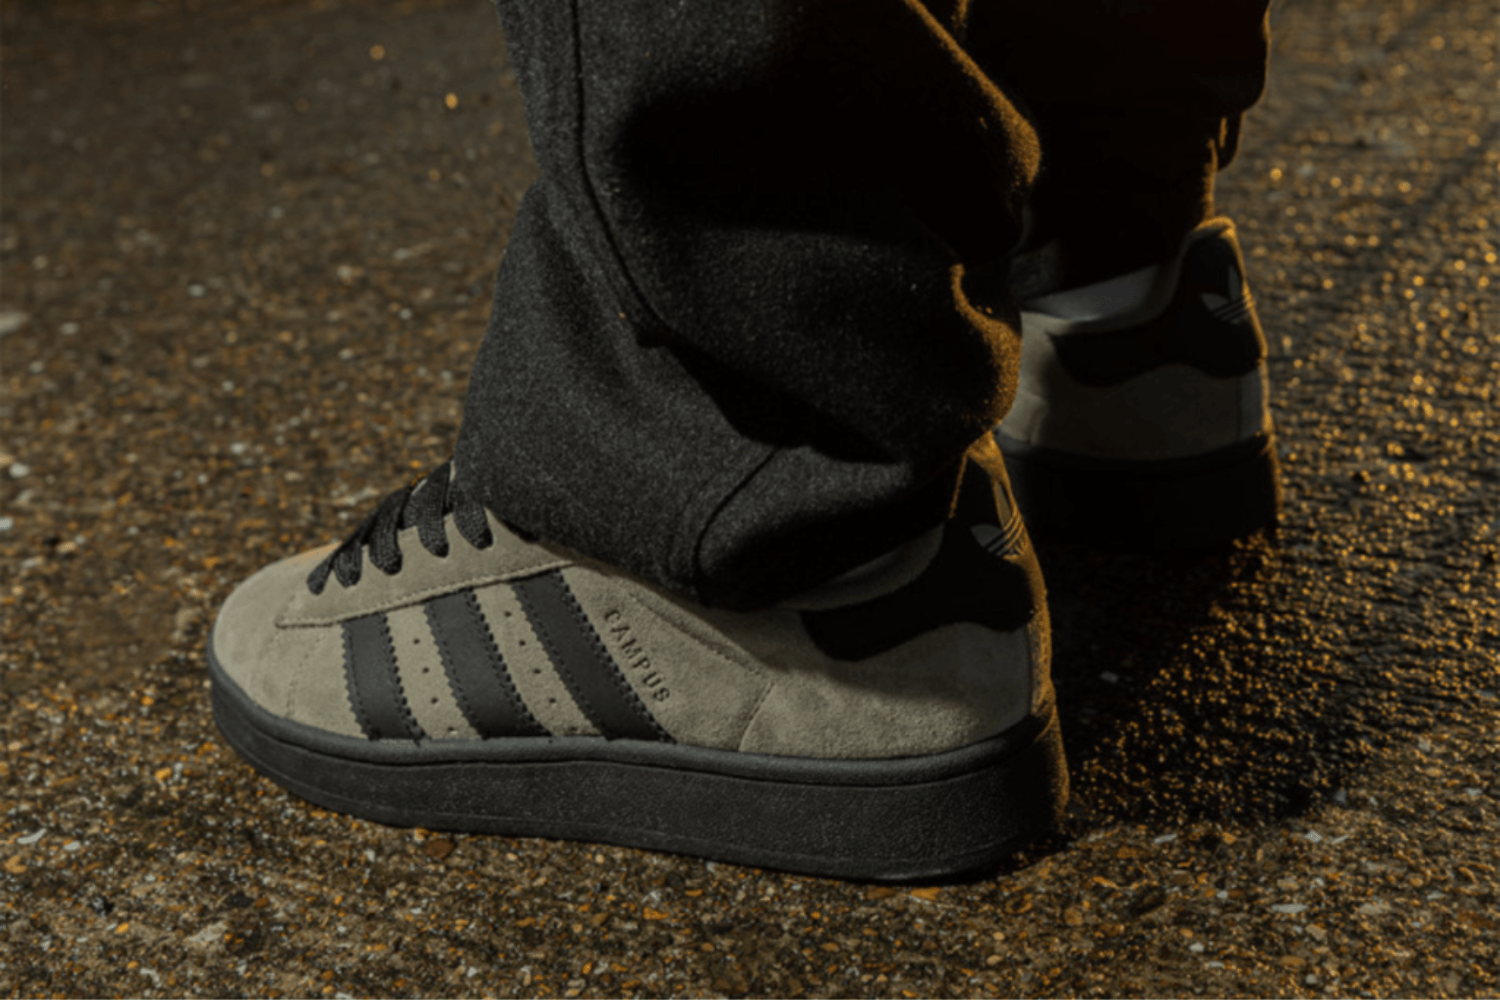 Popular falsas adidas Campus 00s you don't want to miss